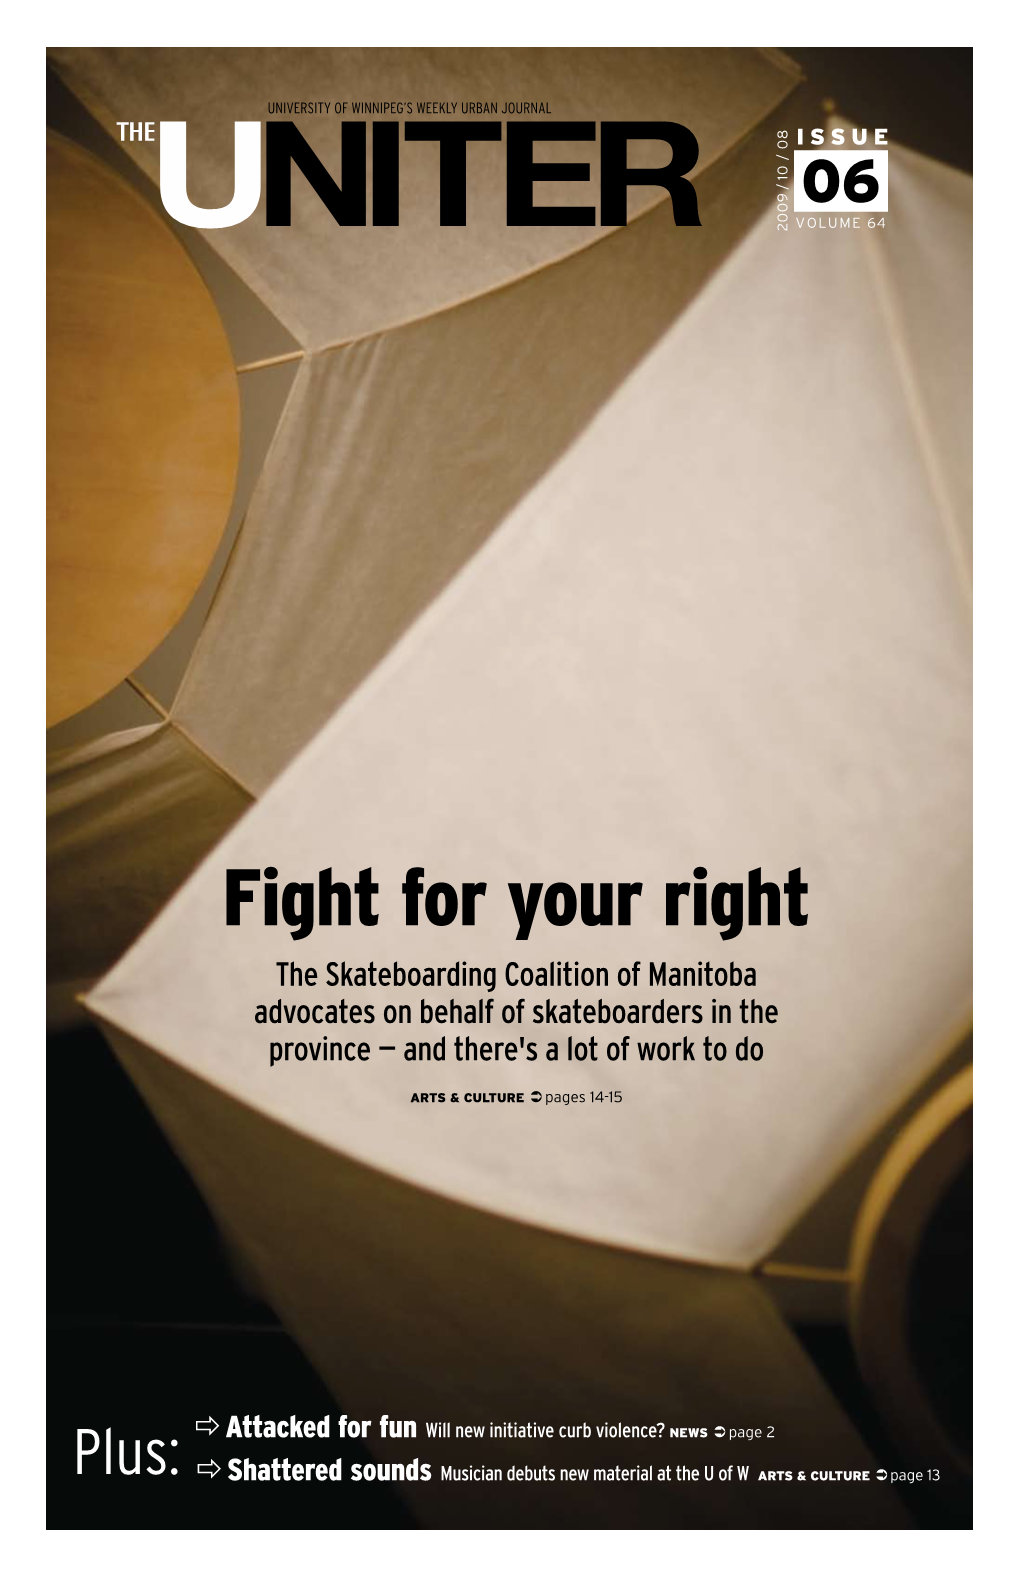 Fight for Your Right the Skateboarding Coalition of Manitoba Advocates on Behalf of Skateboarders in the Province — and There's a Lot of Work to Do